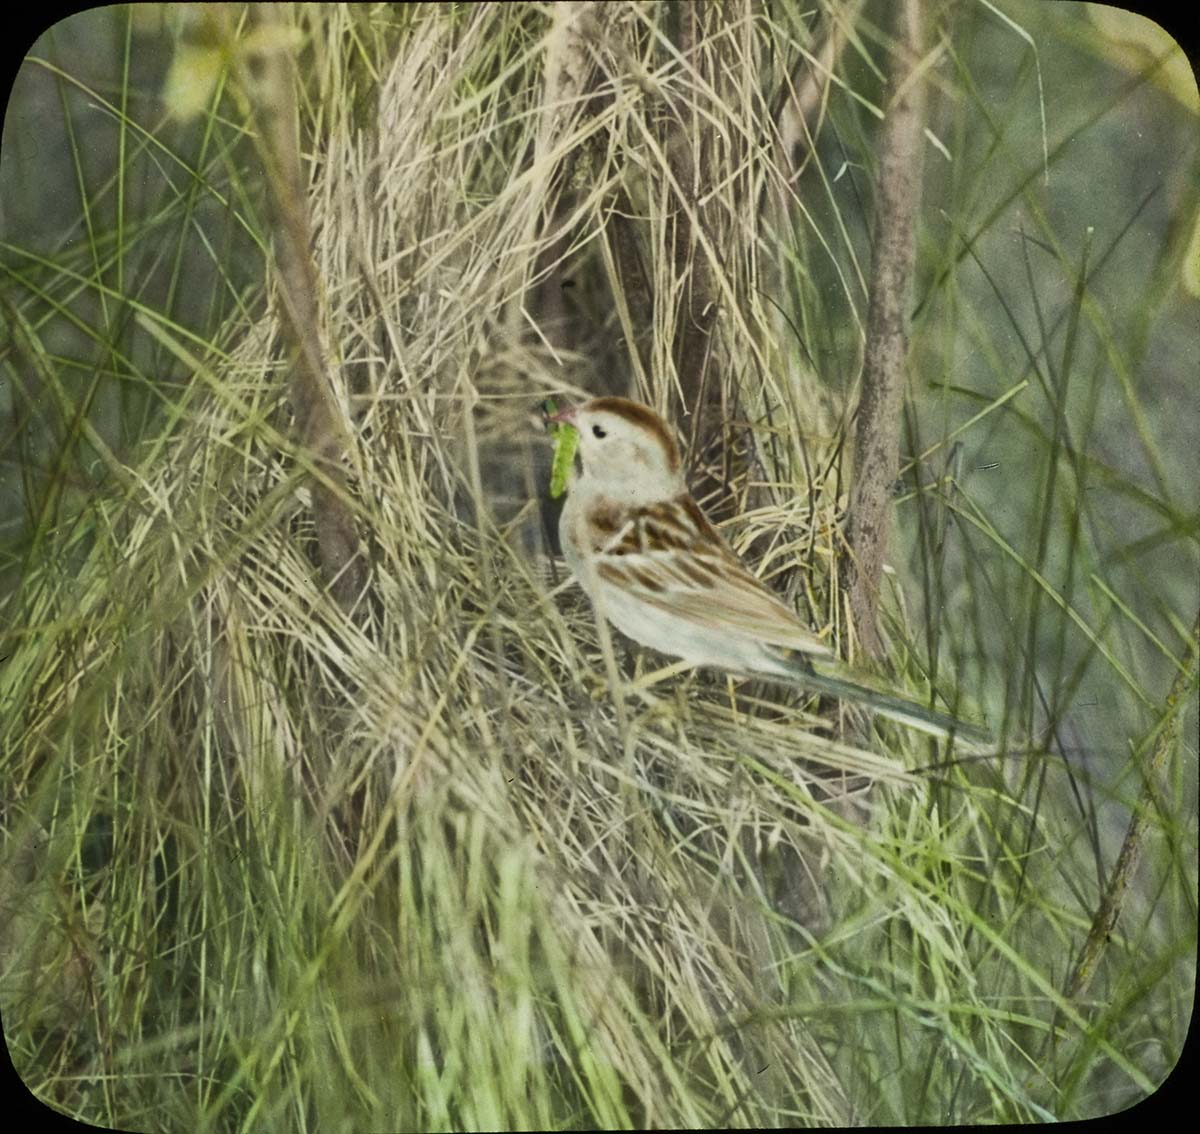 Lantern slide and photograph of a Field Sparrow at nest with food